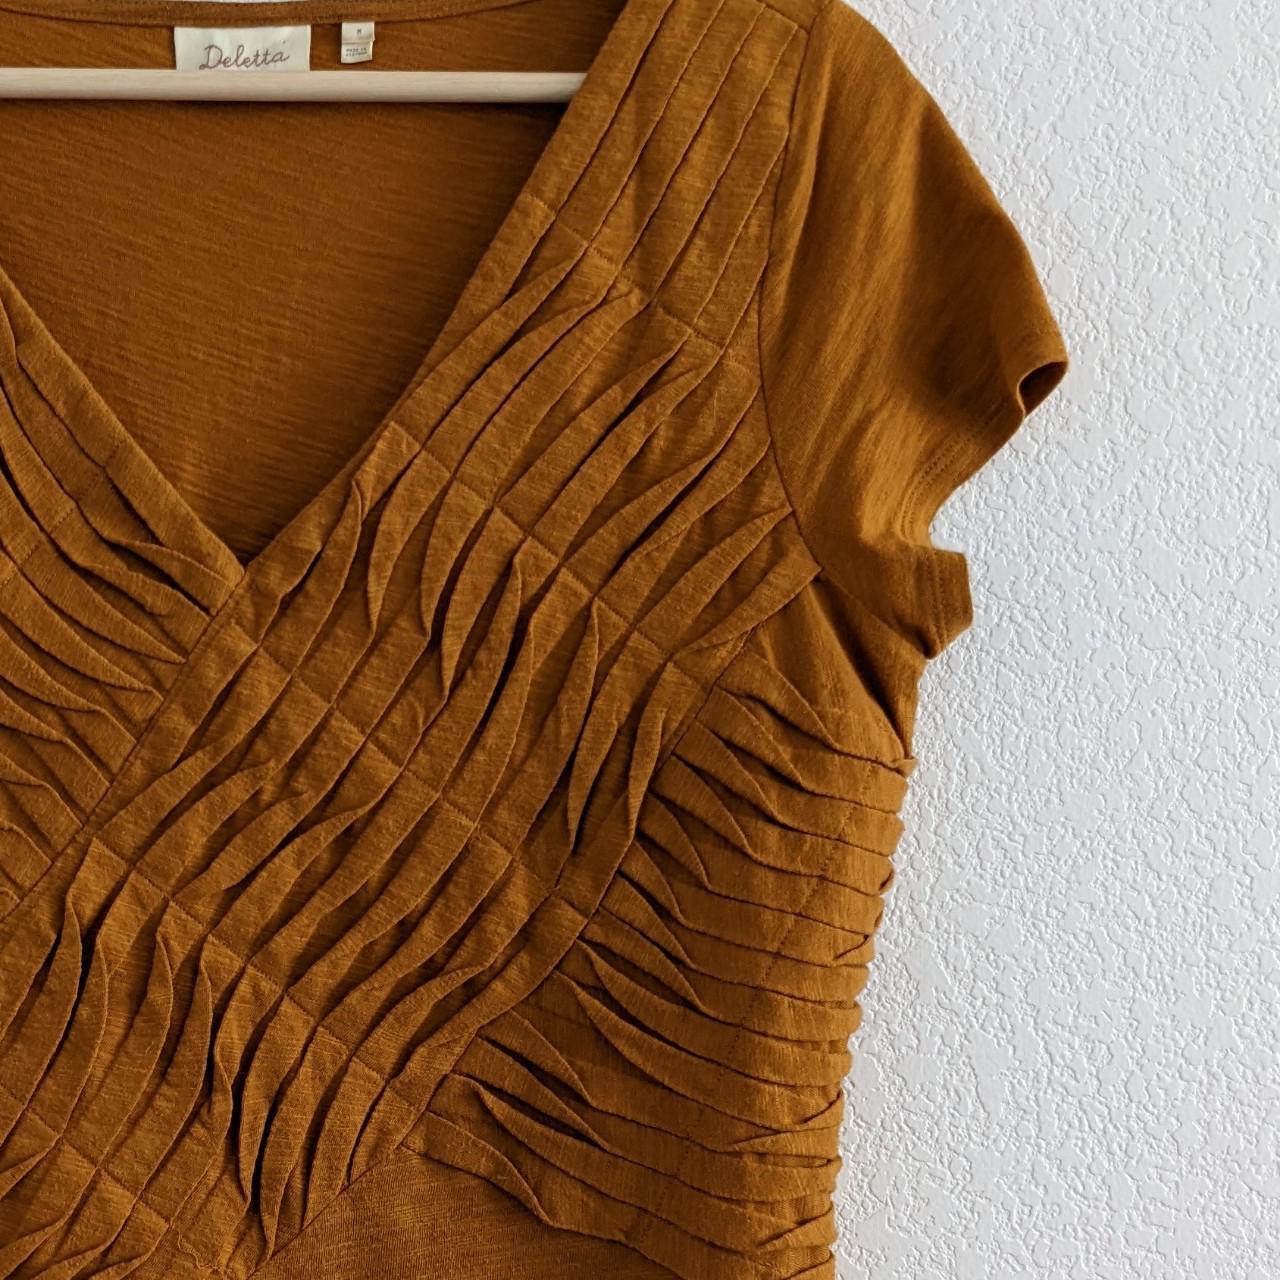 Product Image 2 - Tumeric Gold Textured Pleat Top

Lovely